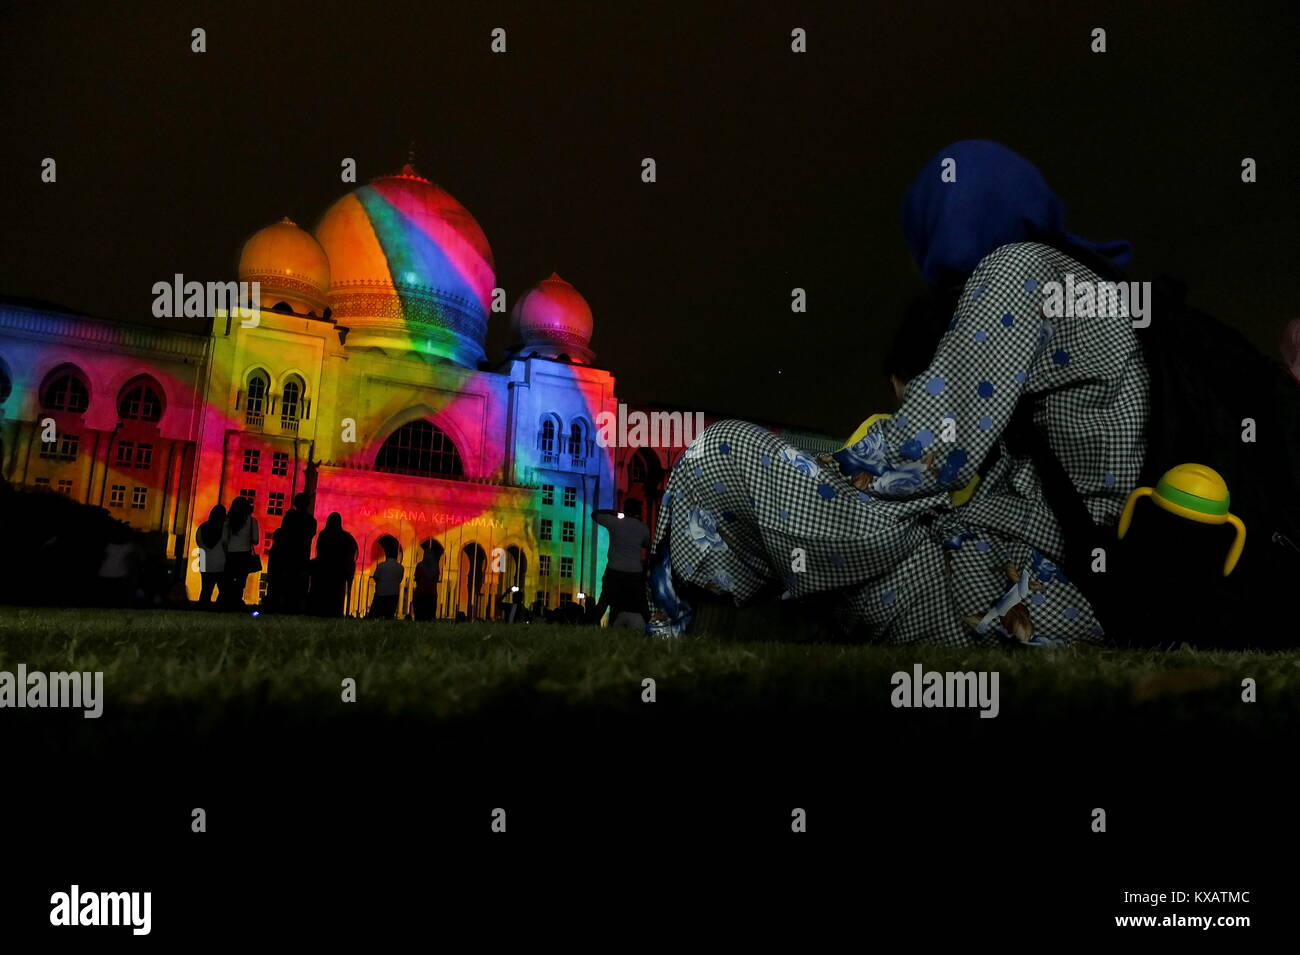 KUALA LUMPUR, MALAYSIA - DECEMBER 28: A women watch a Palace of Justice building is cover by Projection Mapping during the Putrajaya Lighting Festival on December 28, 2017 in Putrajaya, Malaysia. The four-night festival featured a light art communities and university students in Malaysia showcasing their creativity of light-themed events, including Luminous lighting effect show, decorative arch and light structure exhibits, car light show, night fun ride, wayang kulit performance (shadow puppetry), and a light garden . Credit: Samsul Said/AFLO/Alamy Live News Stock Photo